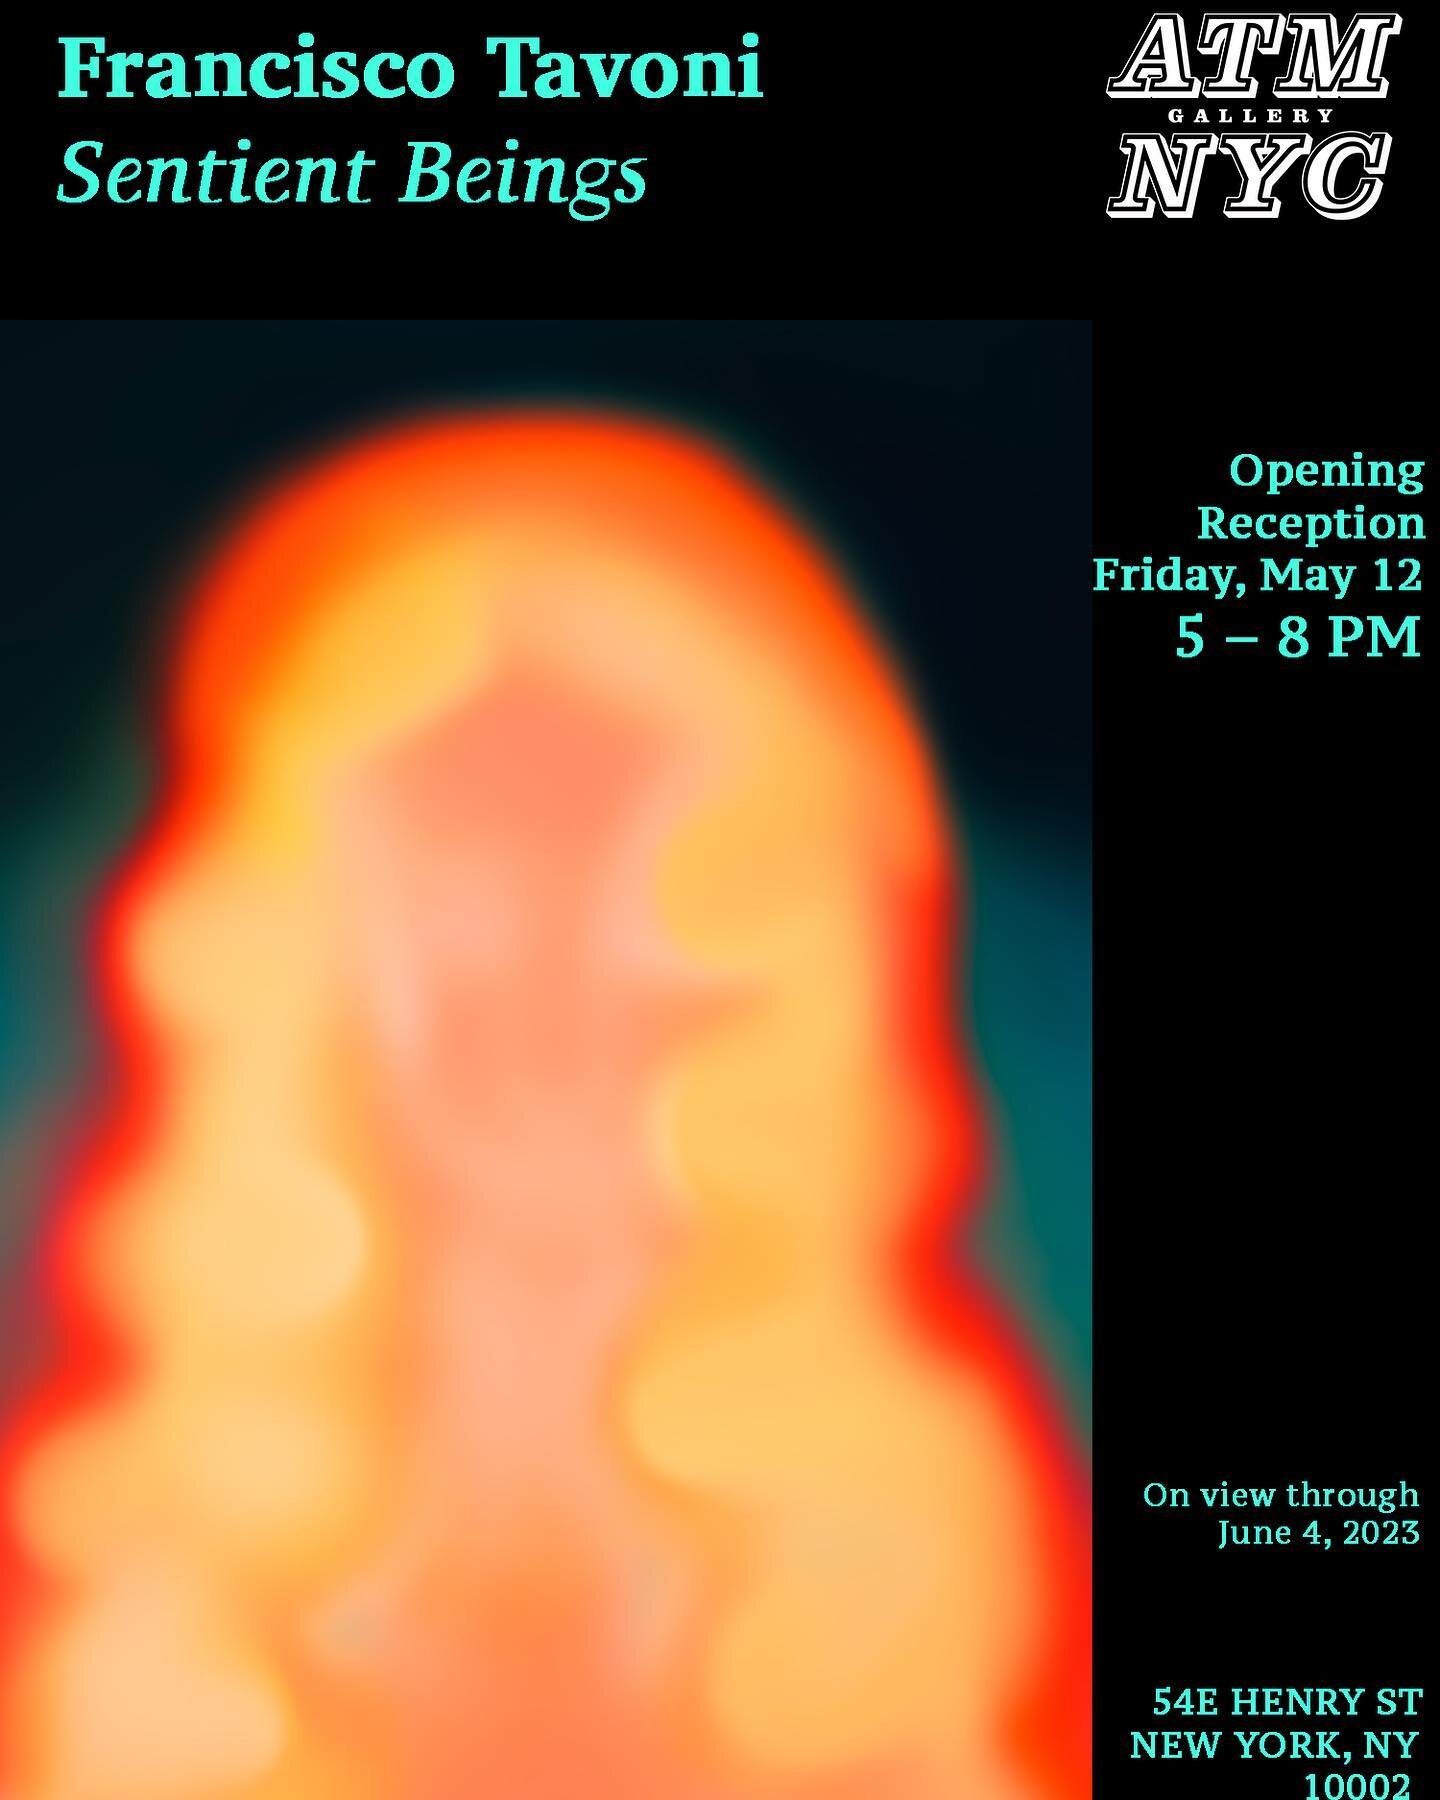 Please join us this Friday for the opening of Francisco Tavoni&rsquo;s solo exhibition, Sentient Beings 🌅

Tavoni employs an unorthodox approach to his photographic method. The fluctuation of vibrant color hues are a product of his filtering light p